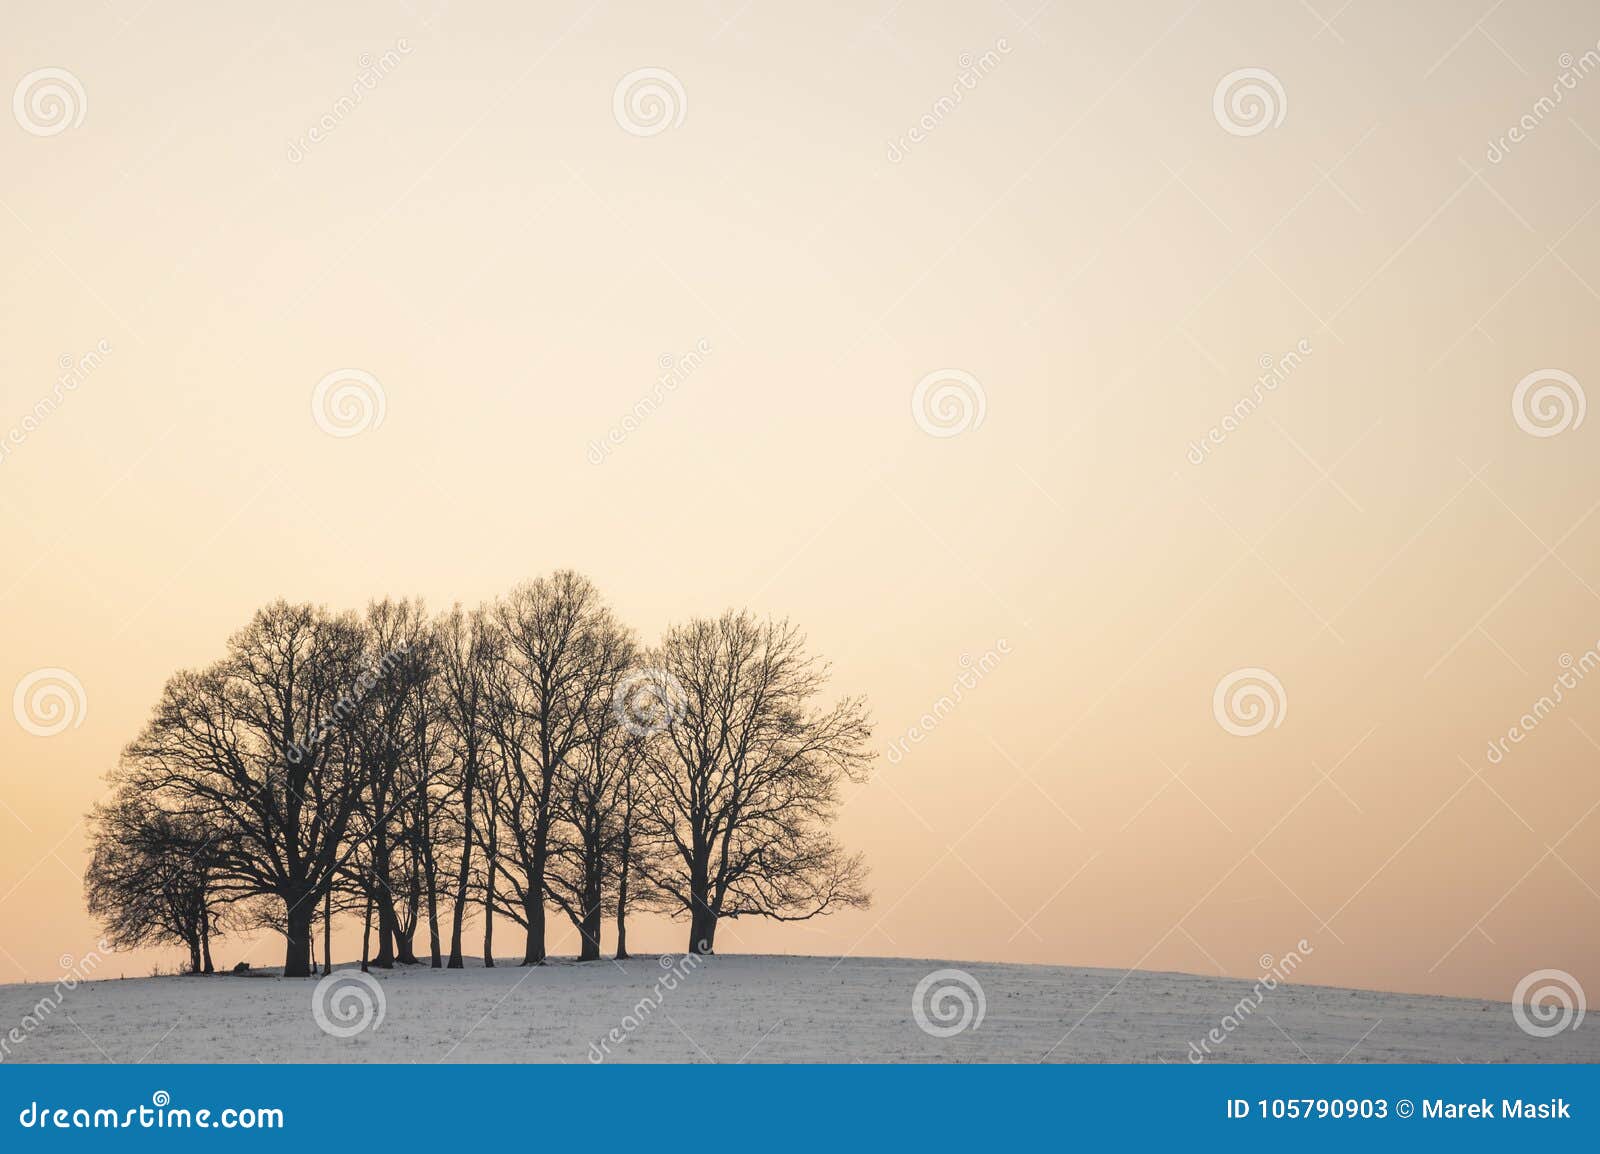 tree trunks at the top of a hill at sunset